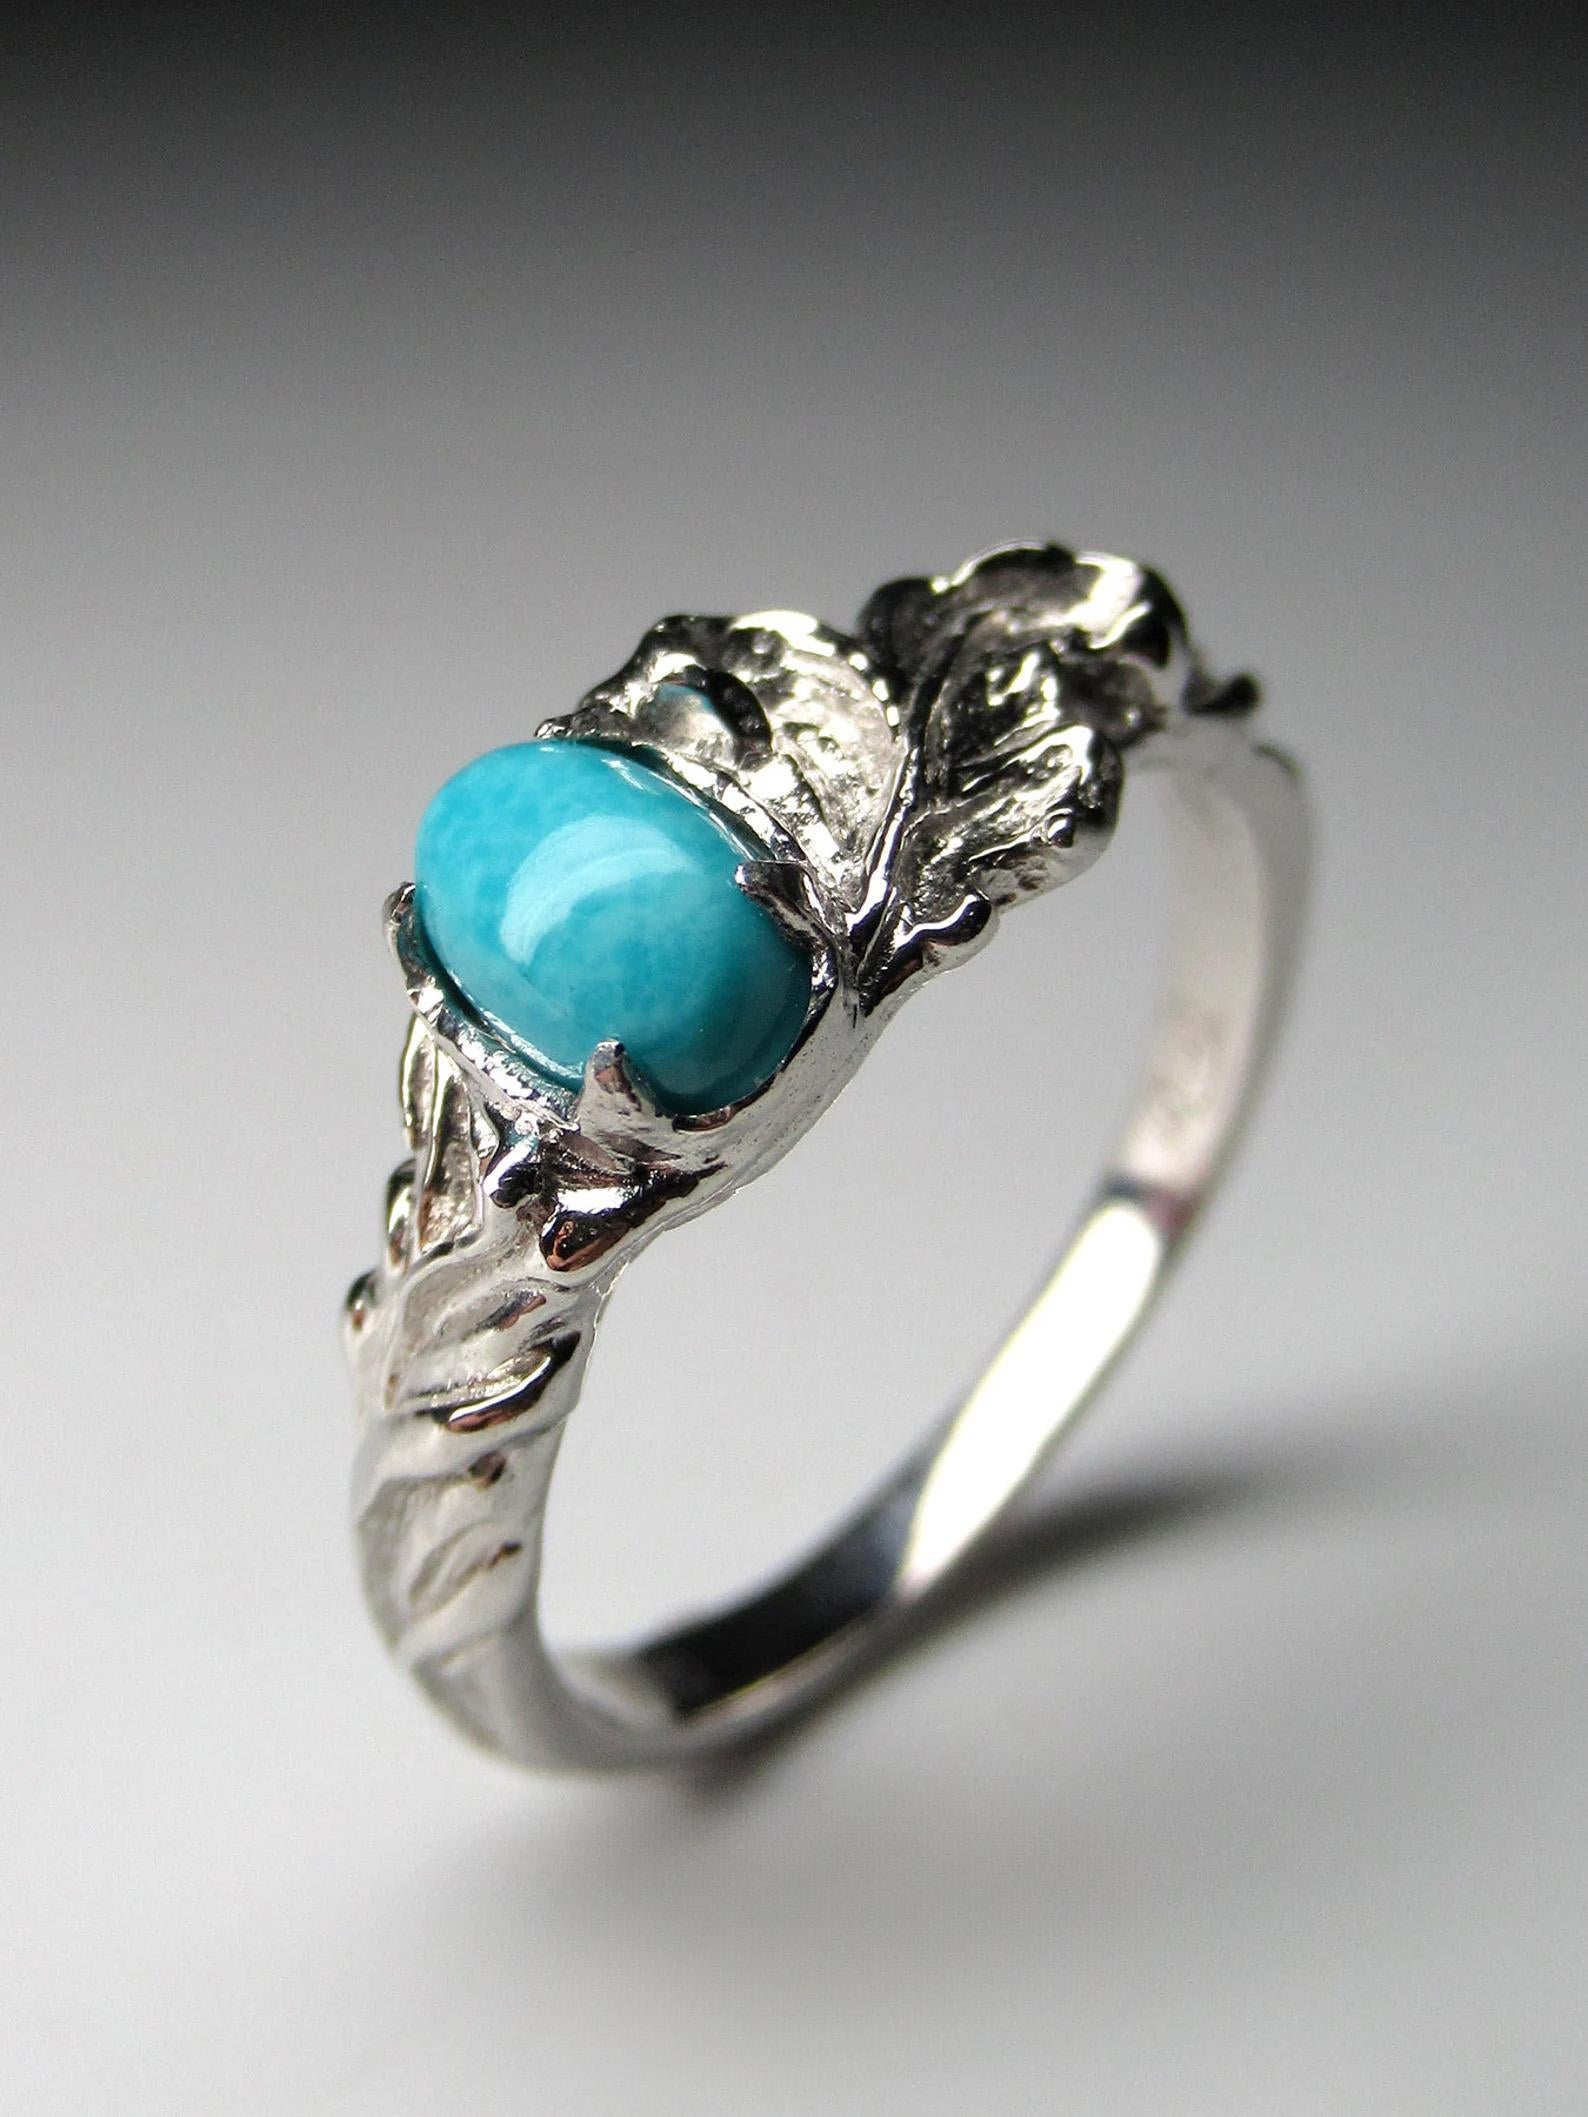 Cabochon Turquoise Silver Ring Natural Sleeping Beauty Art Nouveau style wedding ring For Sale